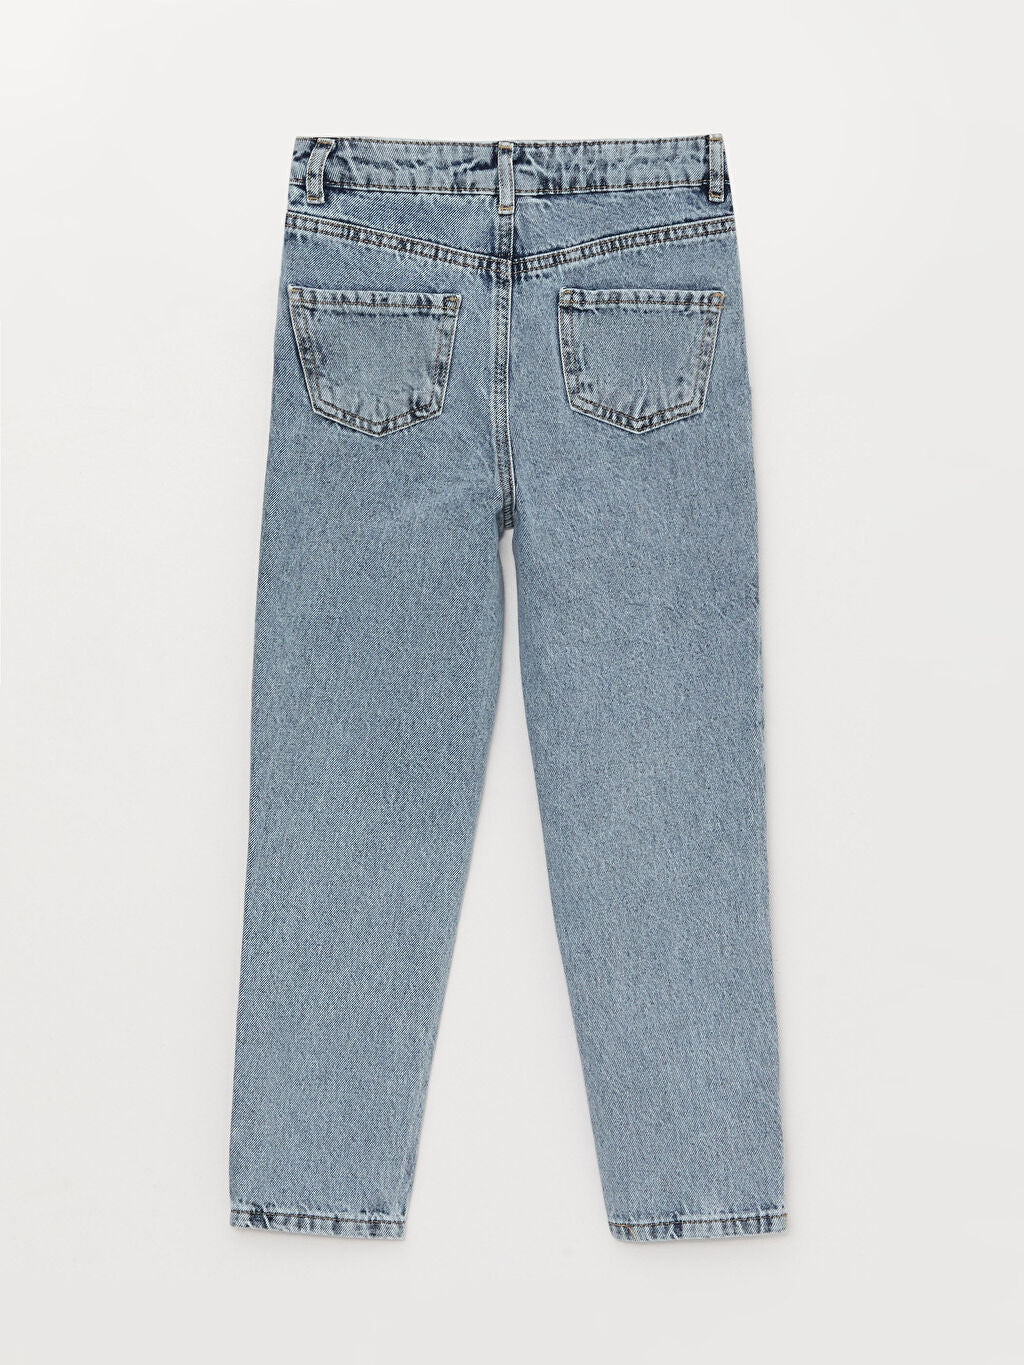 Embroidered Girl Jean Trousers